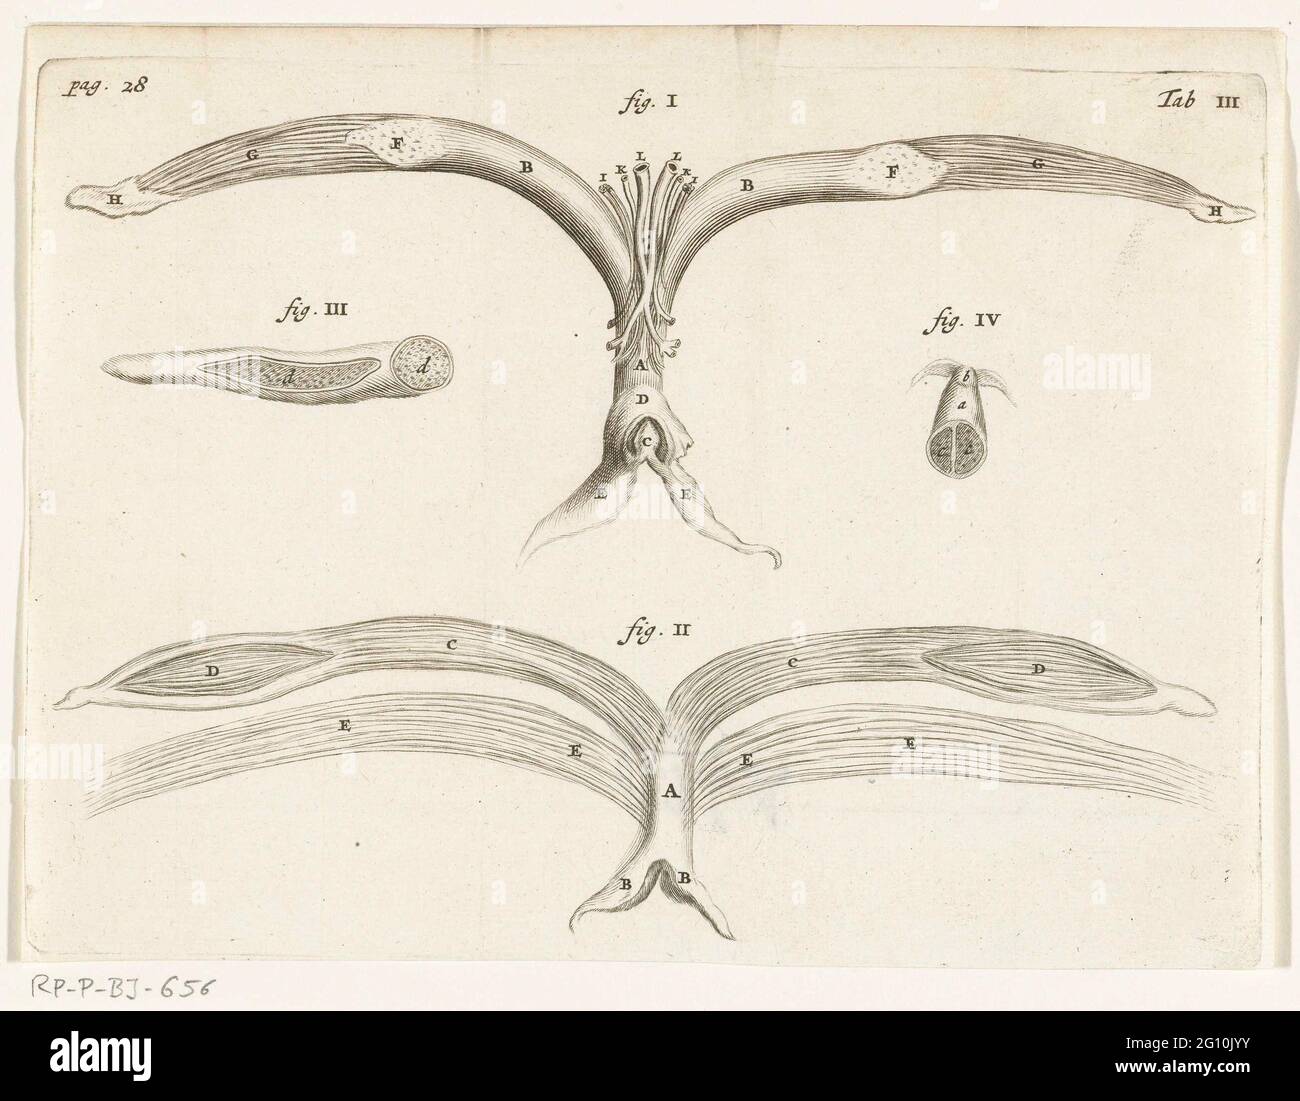 Anatomical Illustration of the female genitalia. In 1672, physician and anatomist Reinier de Graaf published his De mulierum organis about the female reproductive organs, with prints by Hendrik Bary. De Graaf was the first to conclude that a foetus was the product not just of a man’s seed, but also of a woman’s egg. He discovered what he called blisters, which later became known as Graafian follicles. Stock Photo